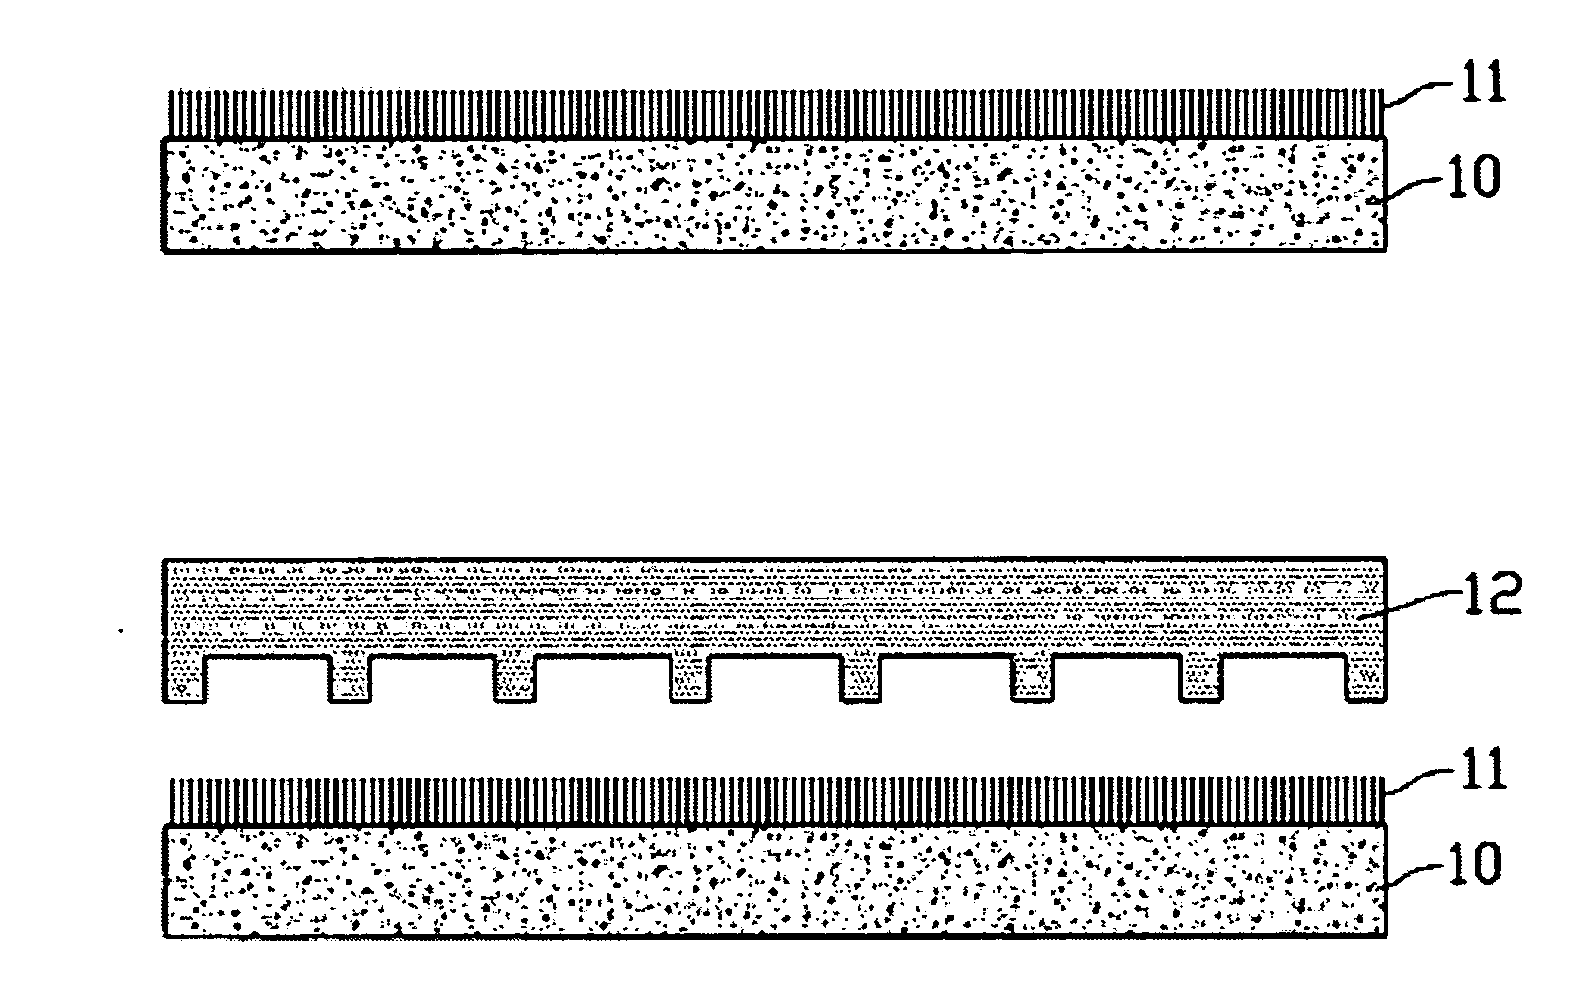 Method for forming a patterned array of carbon nanotubes